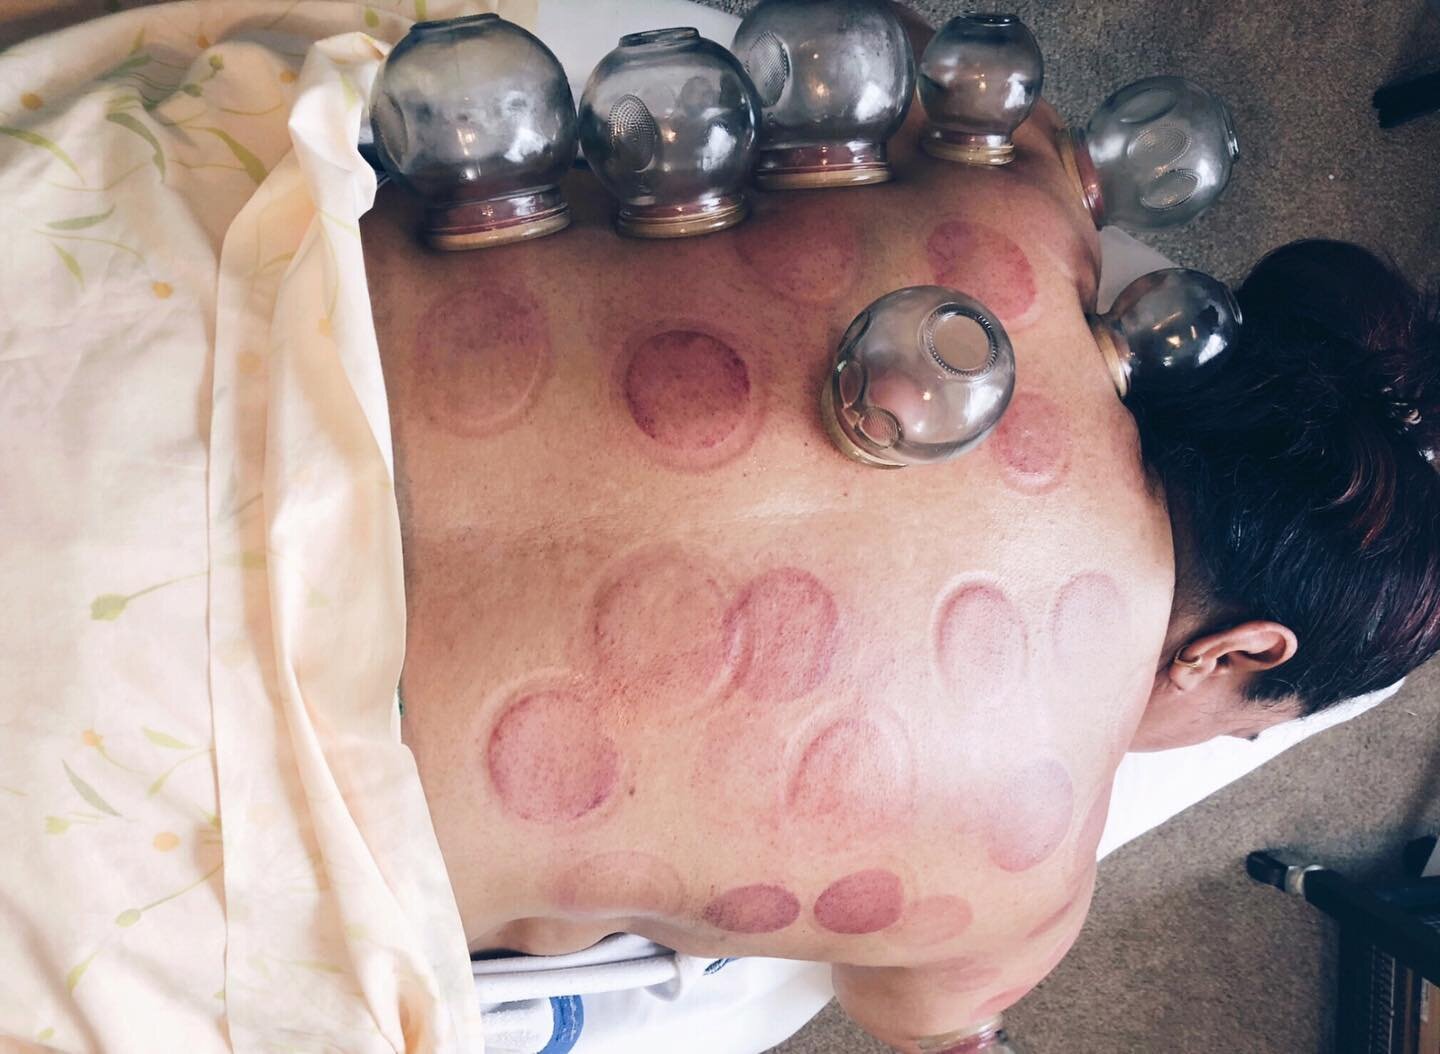 &bull; cupping therapy to increase blood circulation &bull;

In this case of chronic back pain, shoulder pain and numbness/tingling extending into her fingers, she felt immediate relief from her months of pain after this session 👏🏼 

Like most form